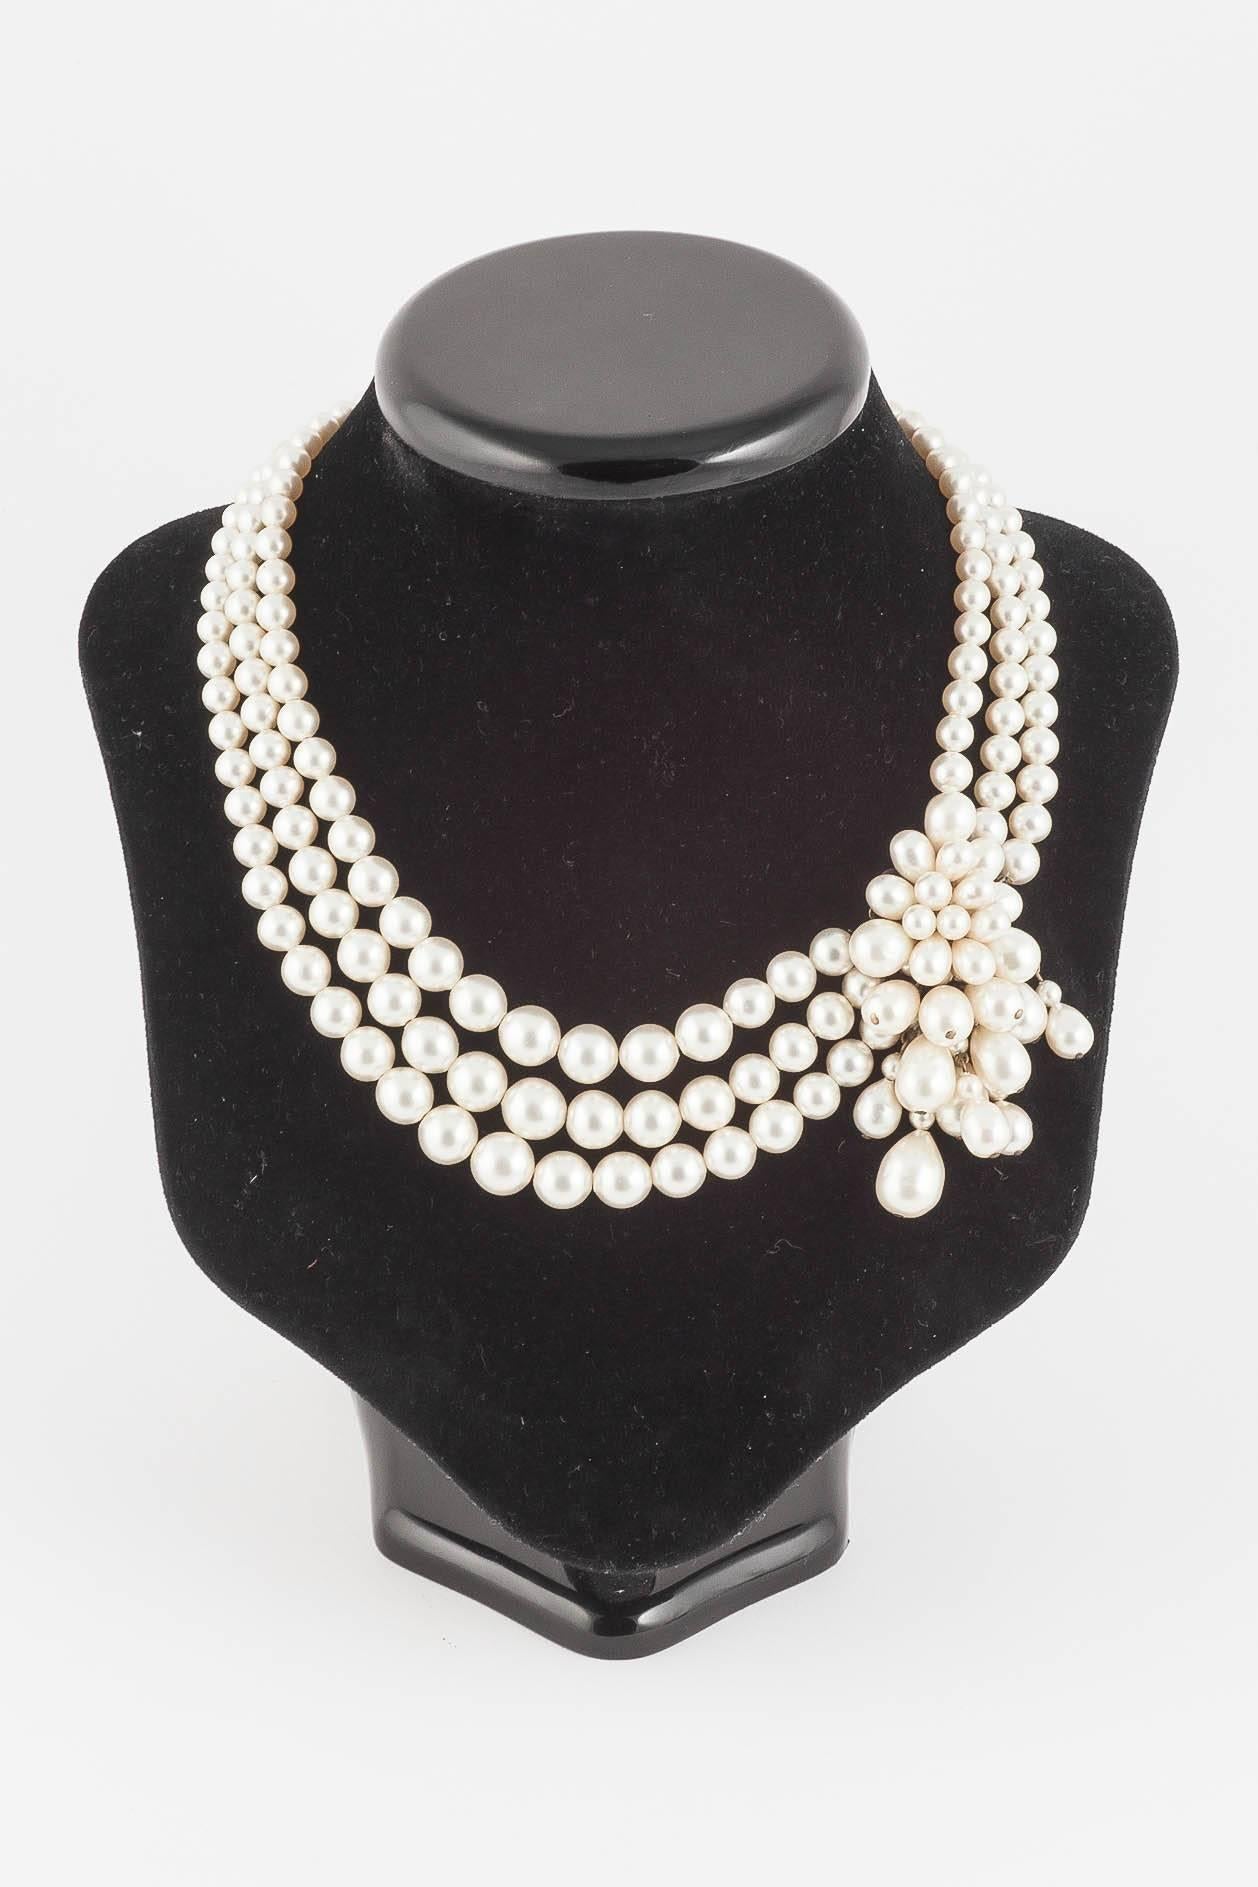 Sumptuous necklace and matching earrings of baroque pearls, with a cascading side or centrepiece to highlight the necklace from Louis Rousselet, made in the mid 1950s in Paris. The matching earrings are very wearable by themselves, with five